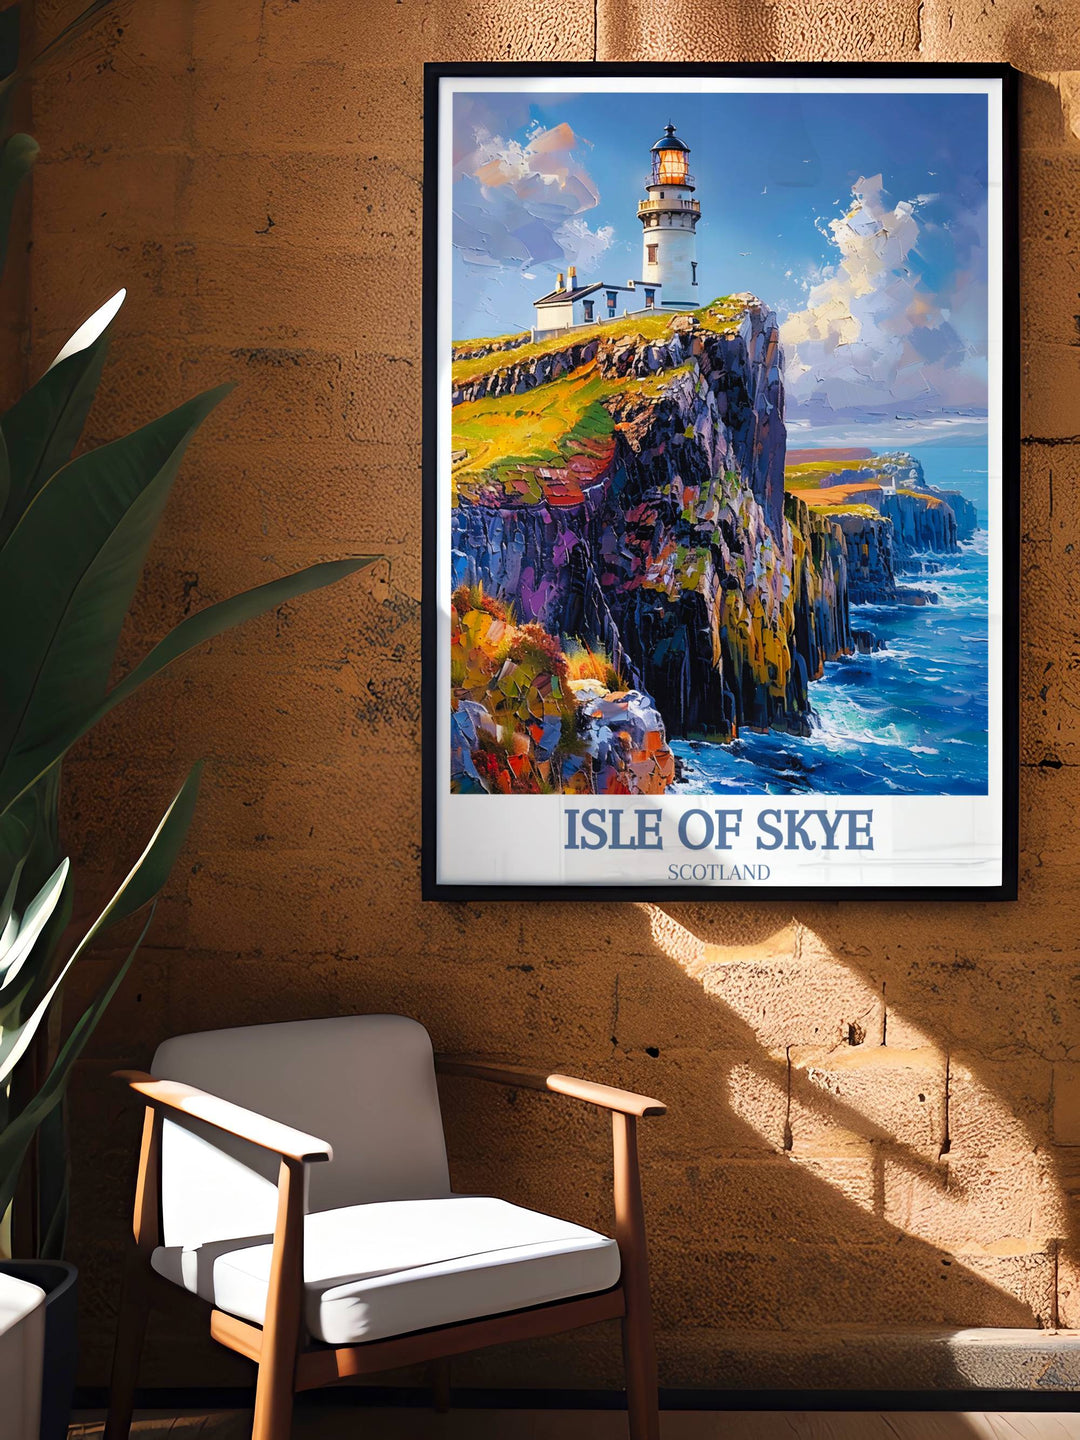 An artistic poster of Neist Point Lighthouse using abstract techniques to highlight its iconic silhouette against the Isle of Skye landscape.